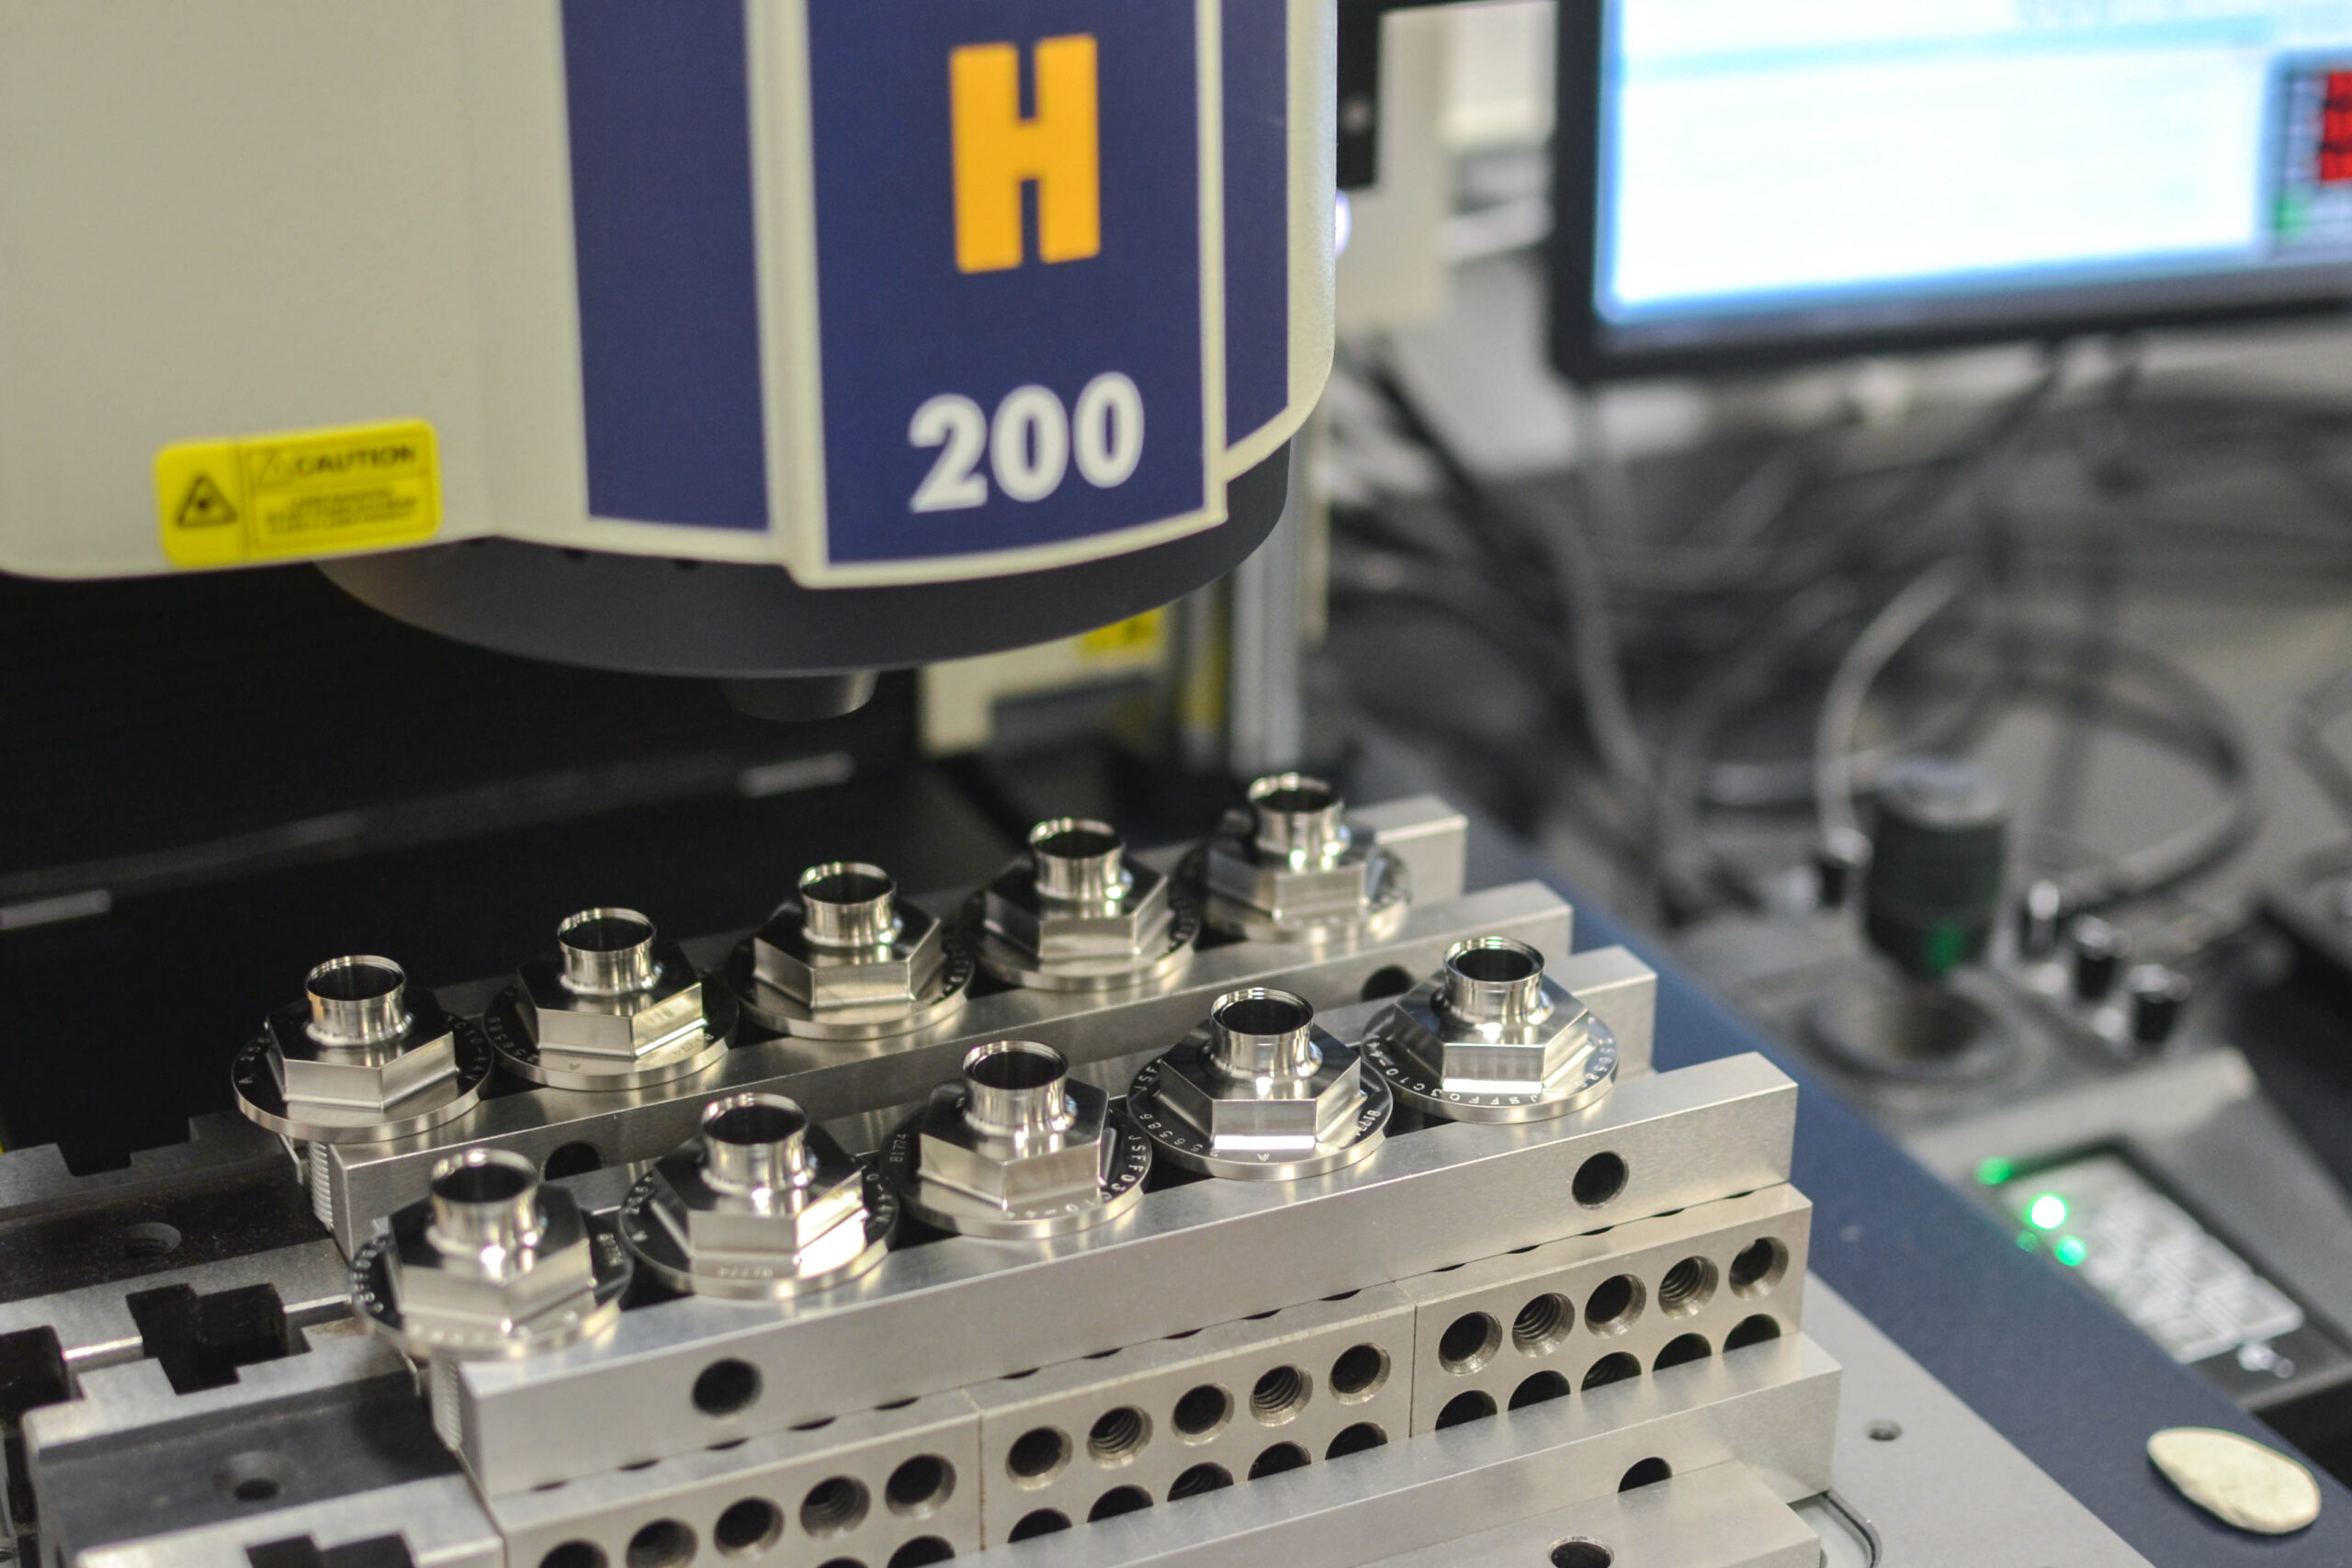 close-up of metal parts in a precision engineering context, positioned under an industrial machine marked "h 200" in an inspection lab.